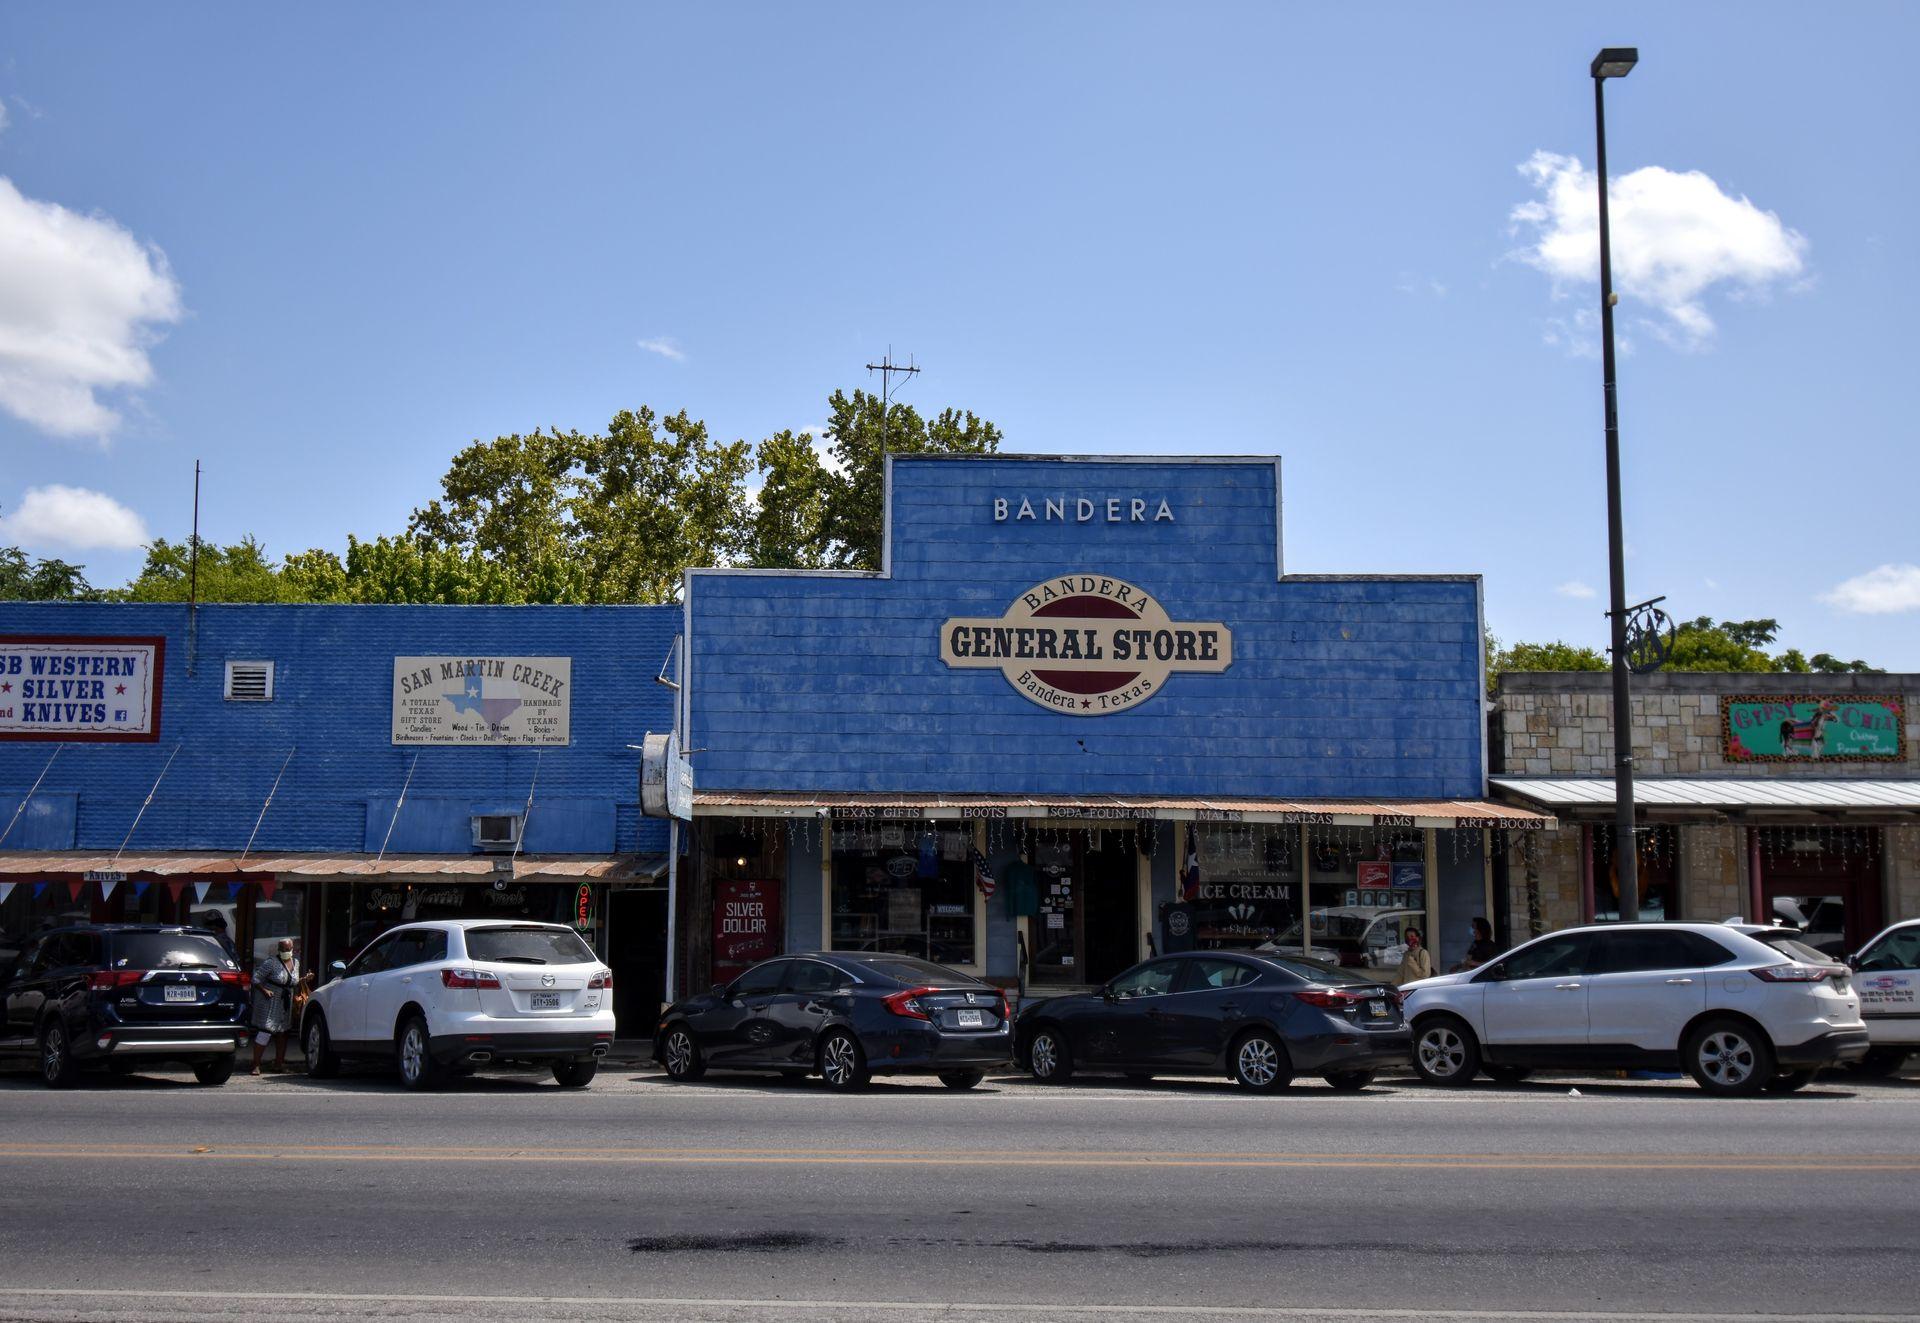 The blue general store in Bandera, Texas